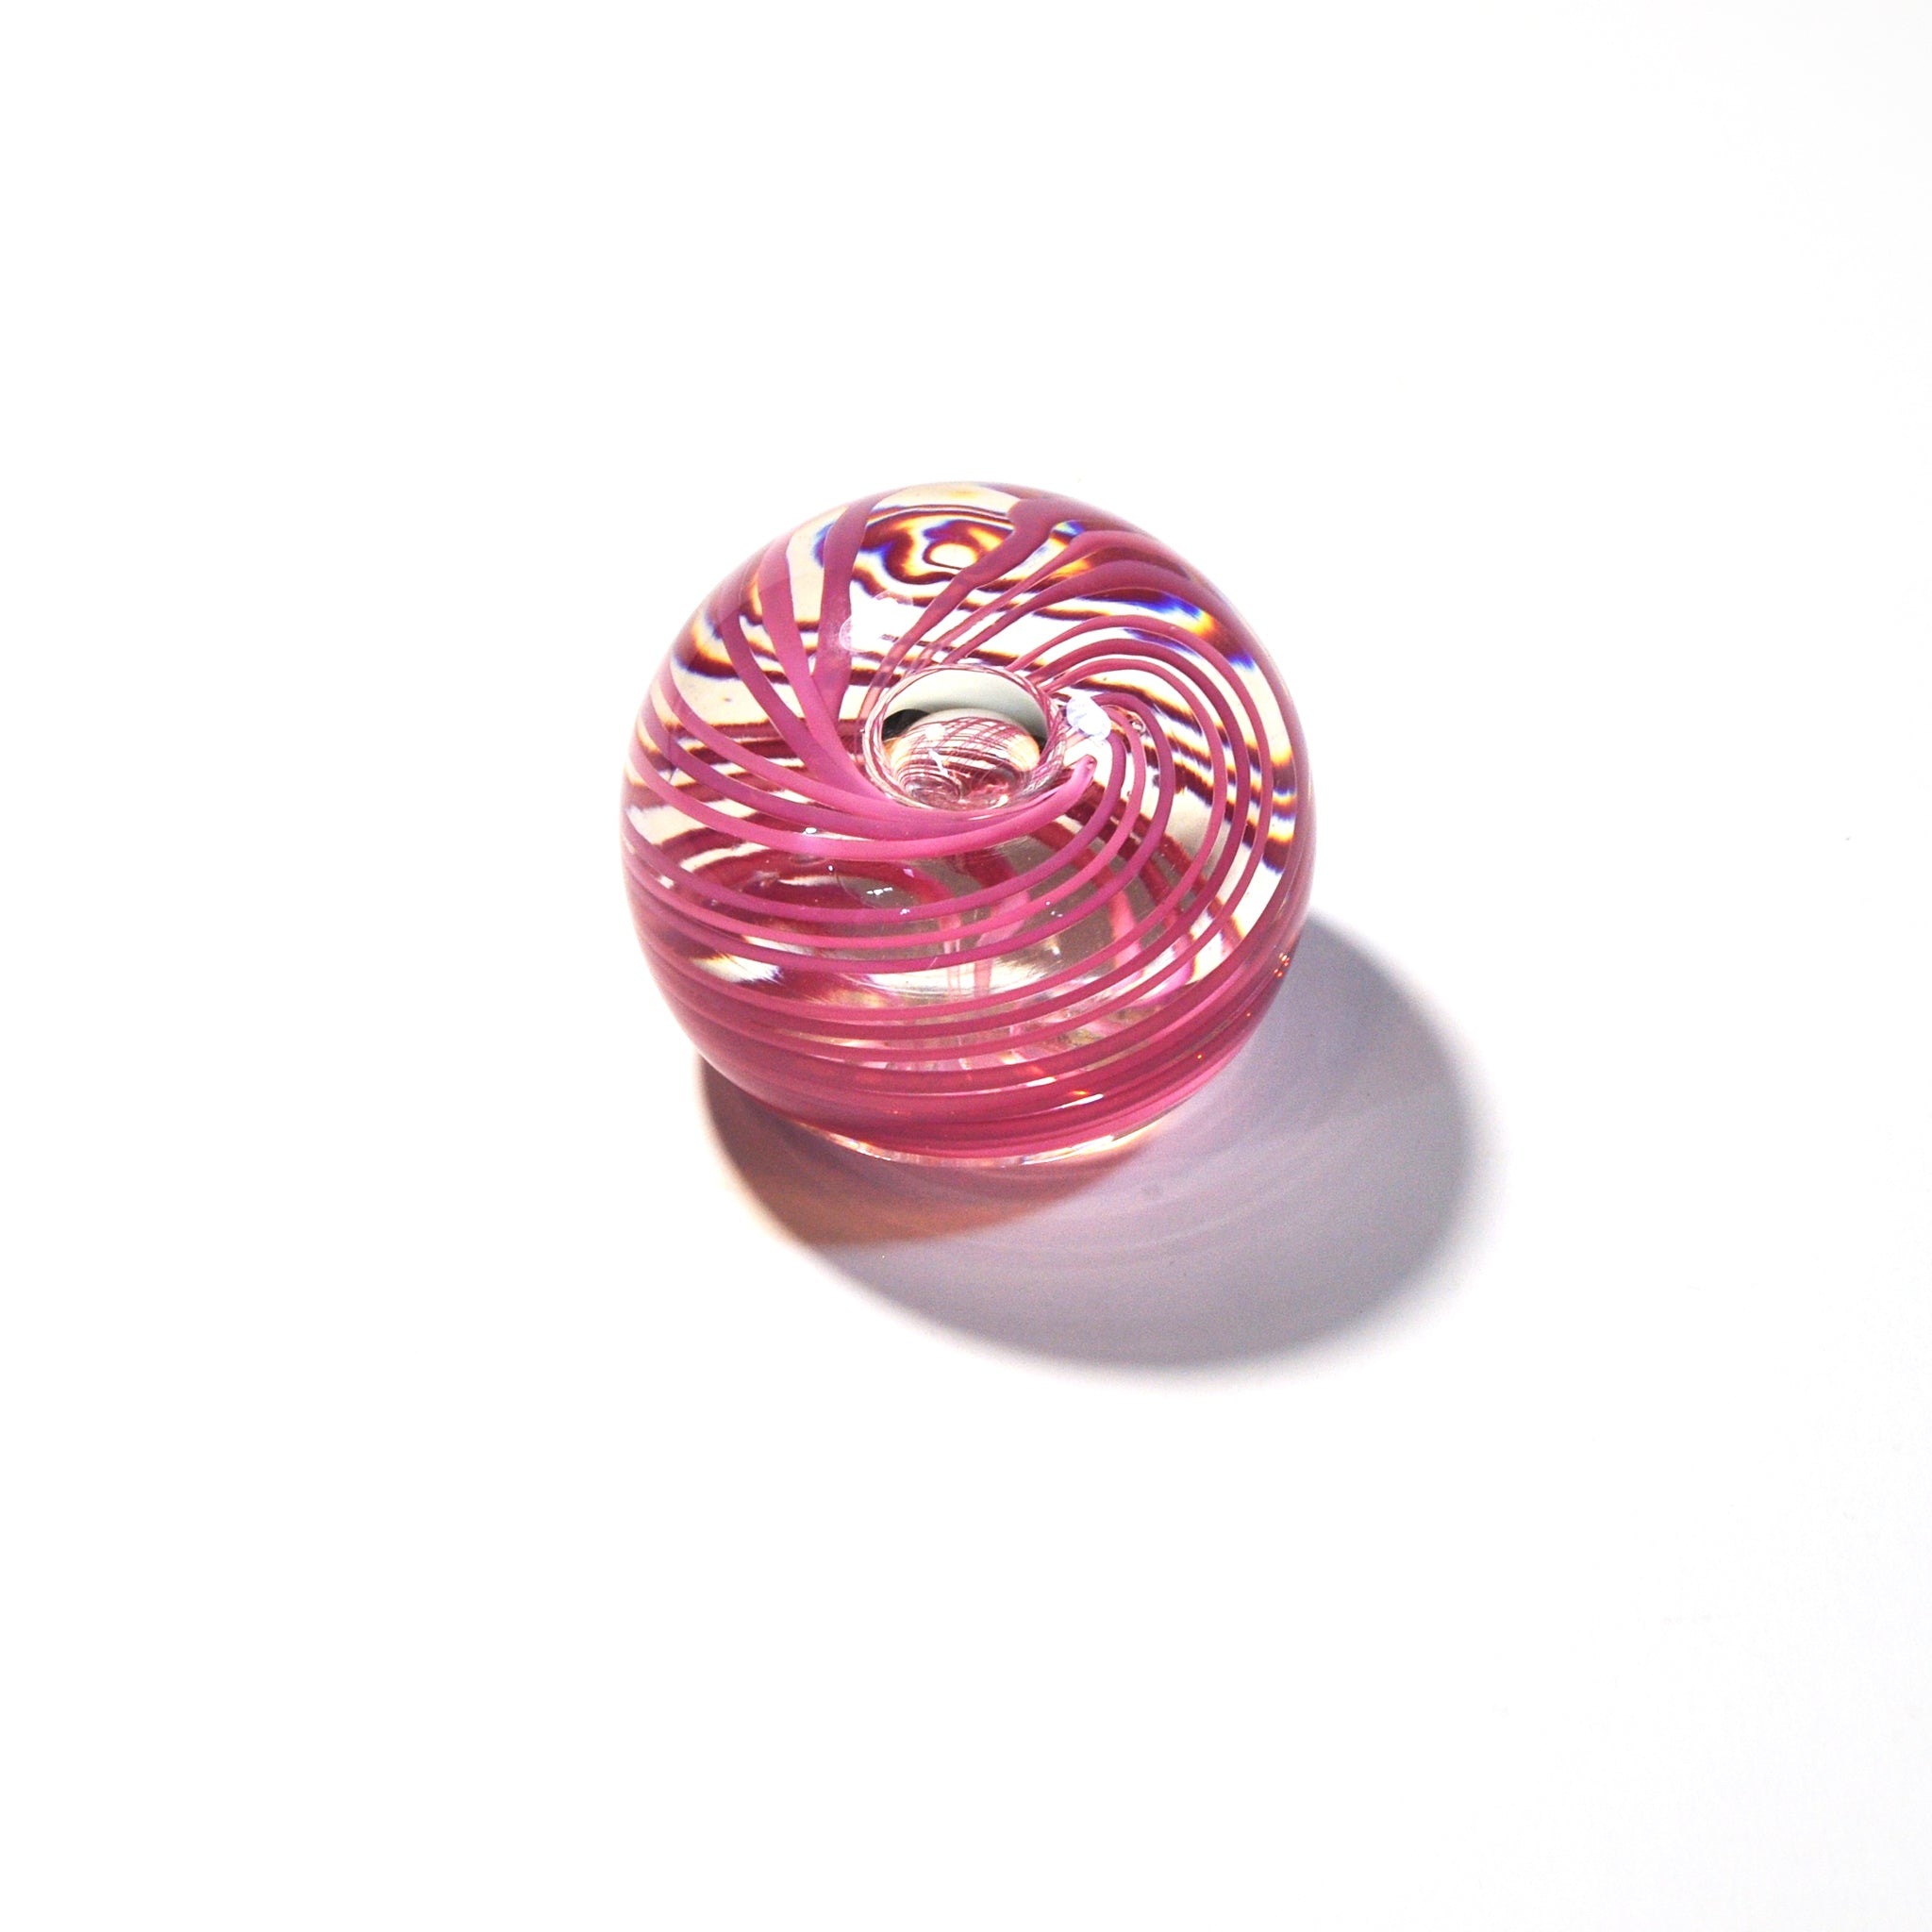 Candy Cane Paperweight | NZG